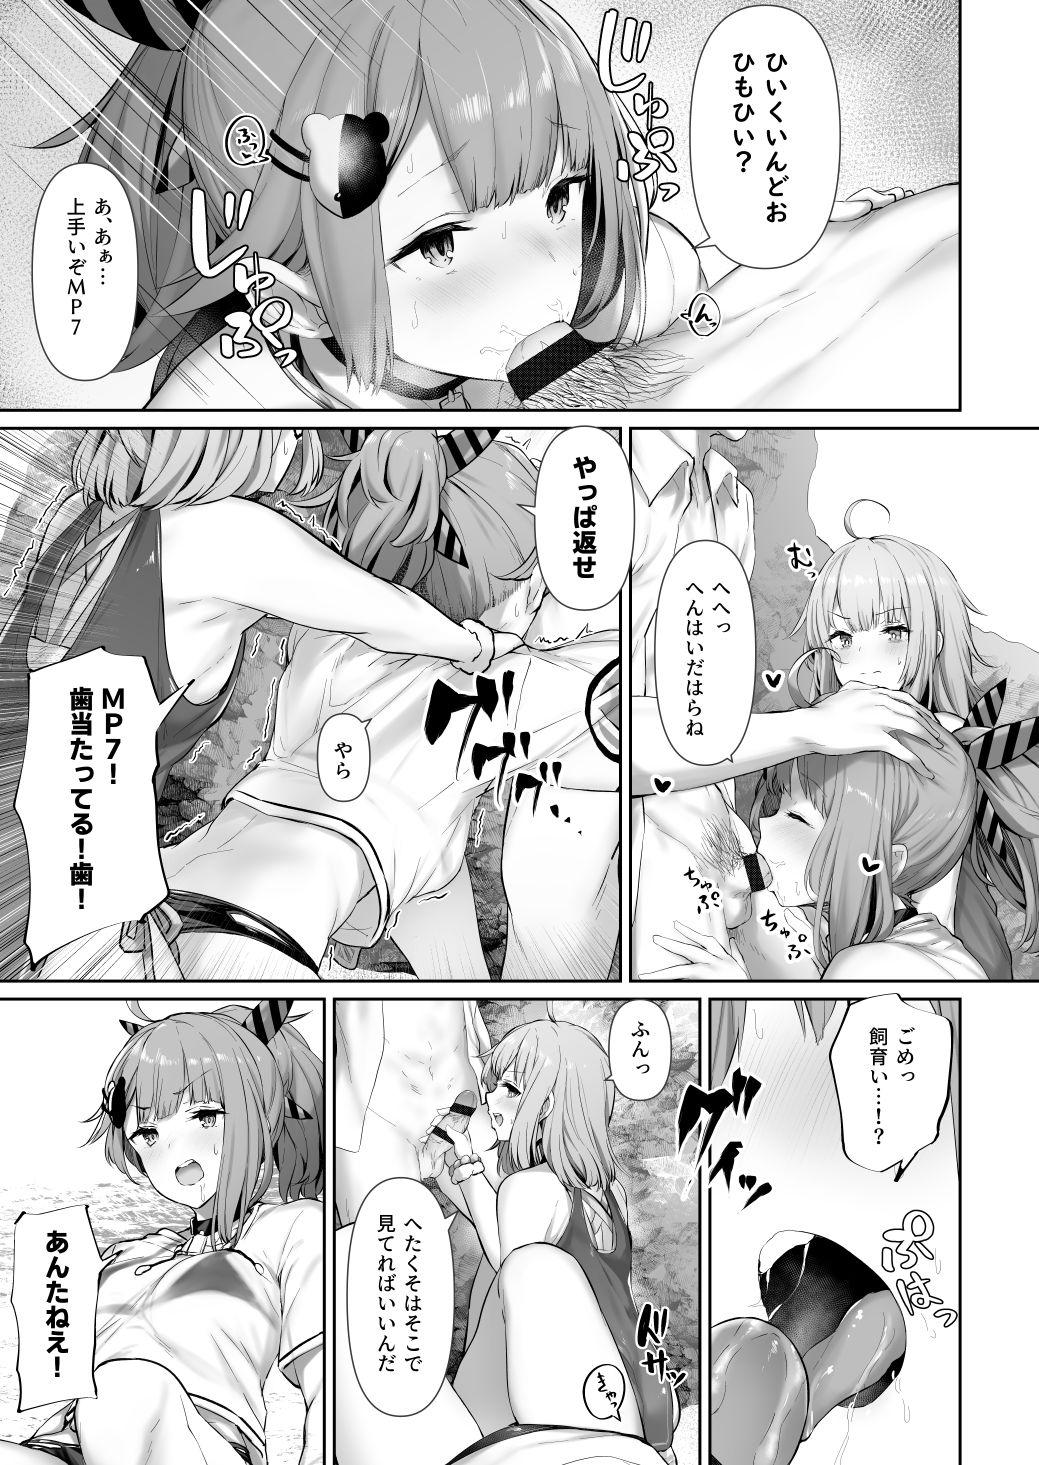 Family MP7 and AA-12 - Girls frontline With - Page 3